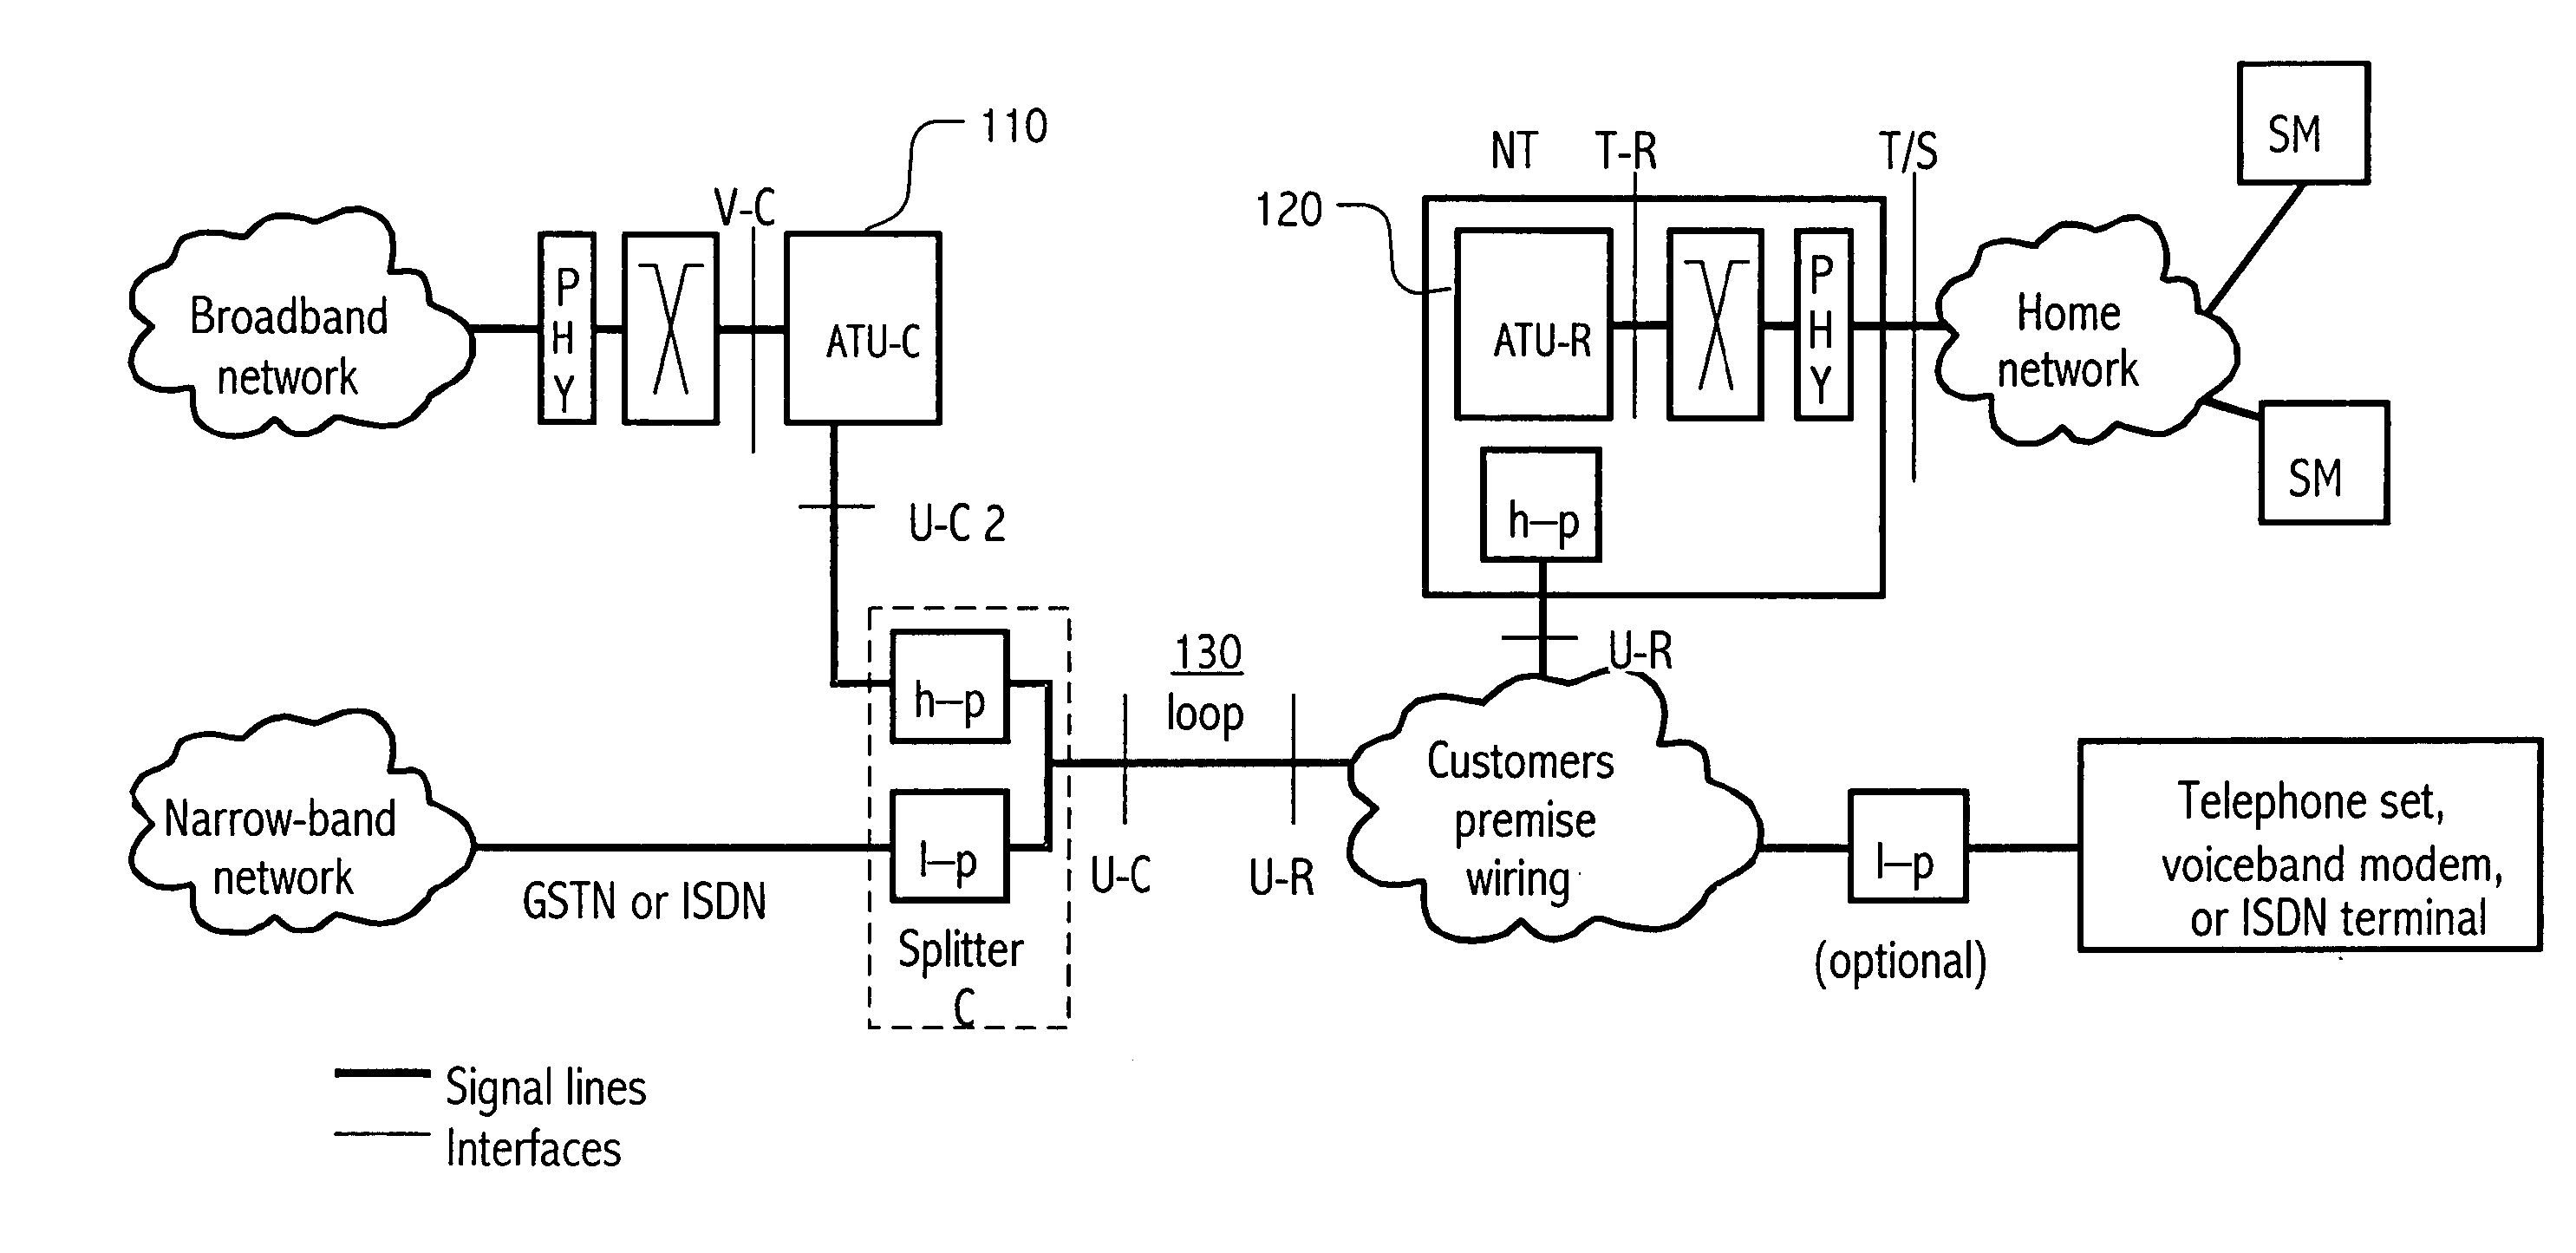 Selectable training signals based on stored previous connection information for DMT-based system